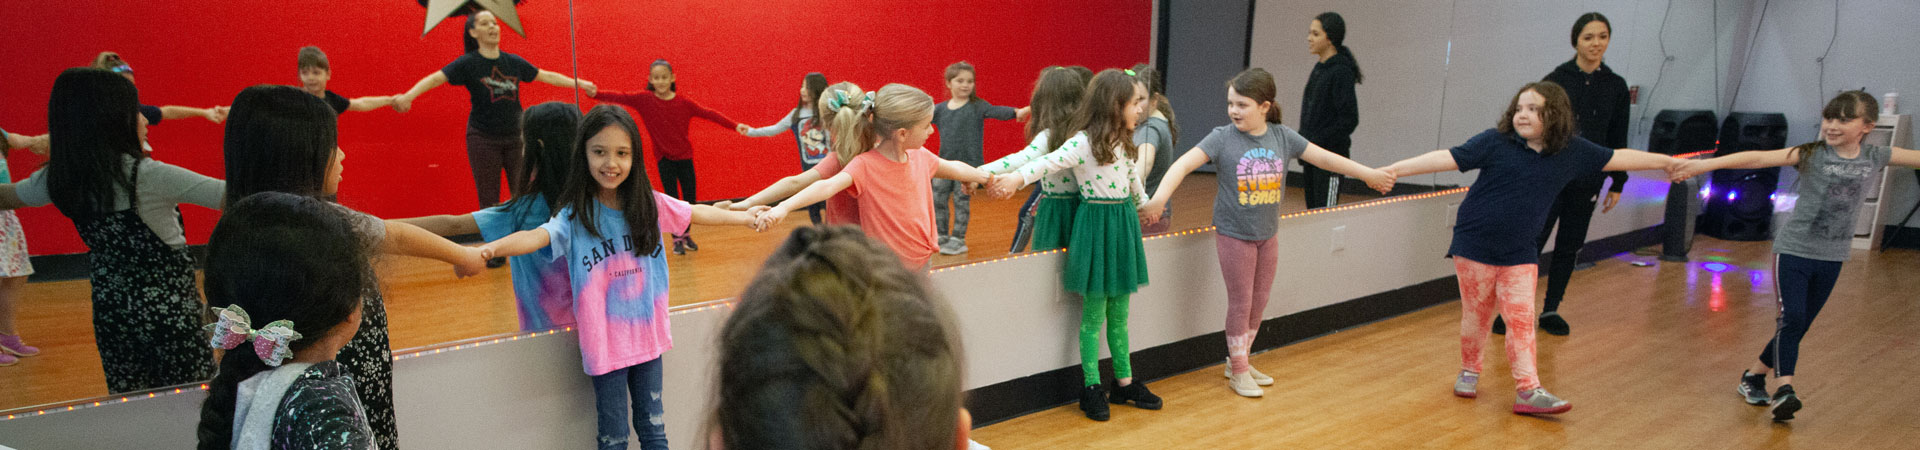  A group of youth Girl Scout members are in a gym with a woode floor and red walls. The Girl Scouts are standing around the perimeter of the room, arms extended, and holding each other's hands.  